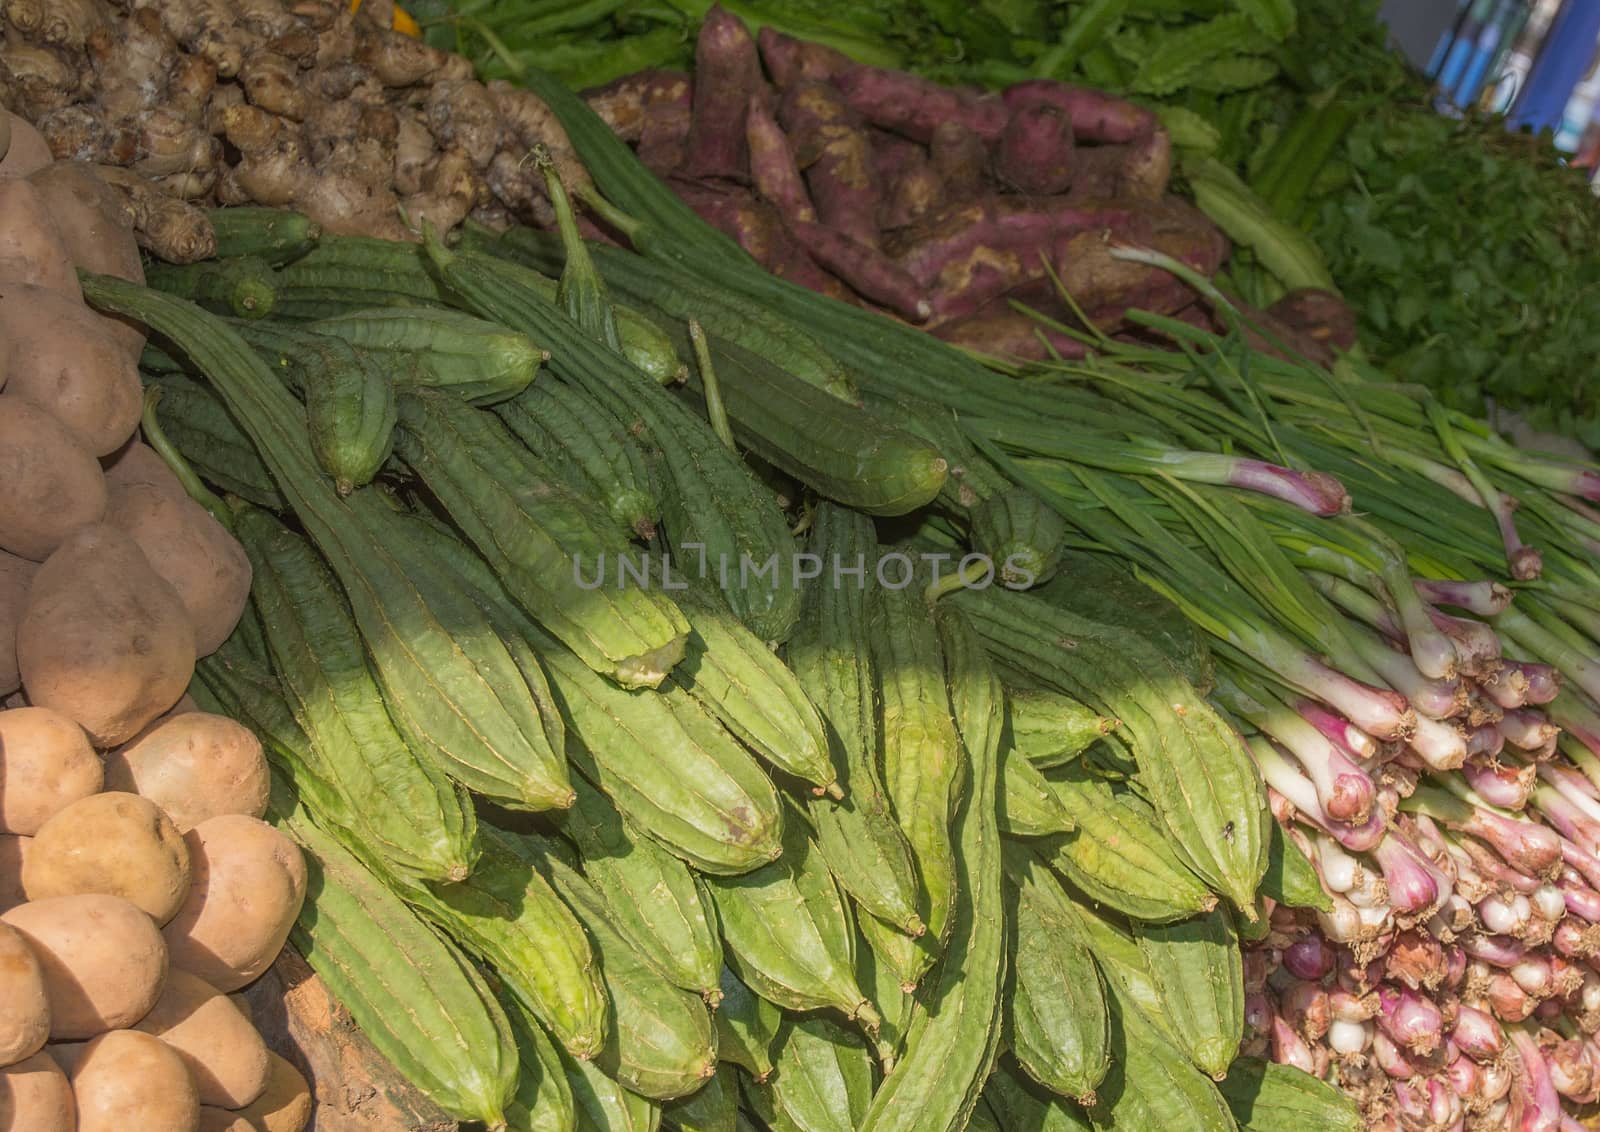 Vegetables in the market. Market stall with potatoes, onions, ginger and other vegetables on December 15, 2014 in Tangalle, Southern Province, Sri Lanka, Asia.